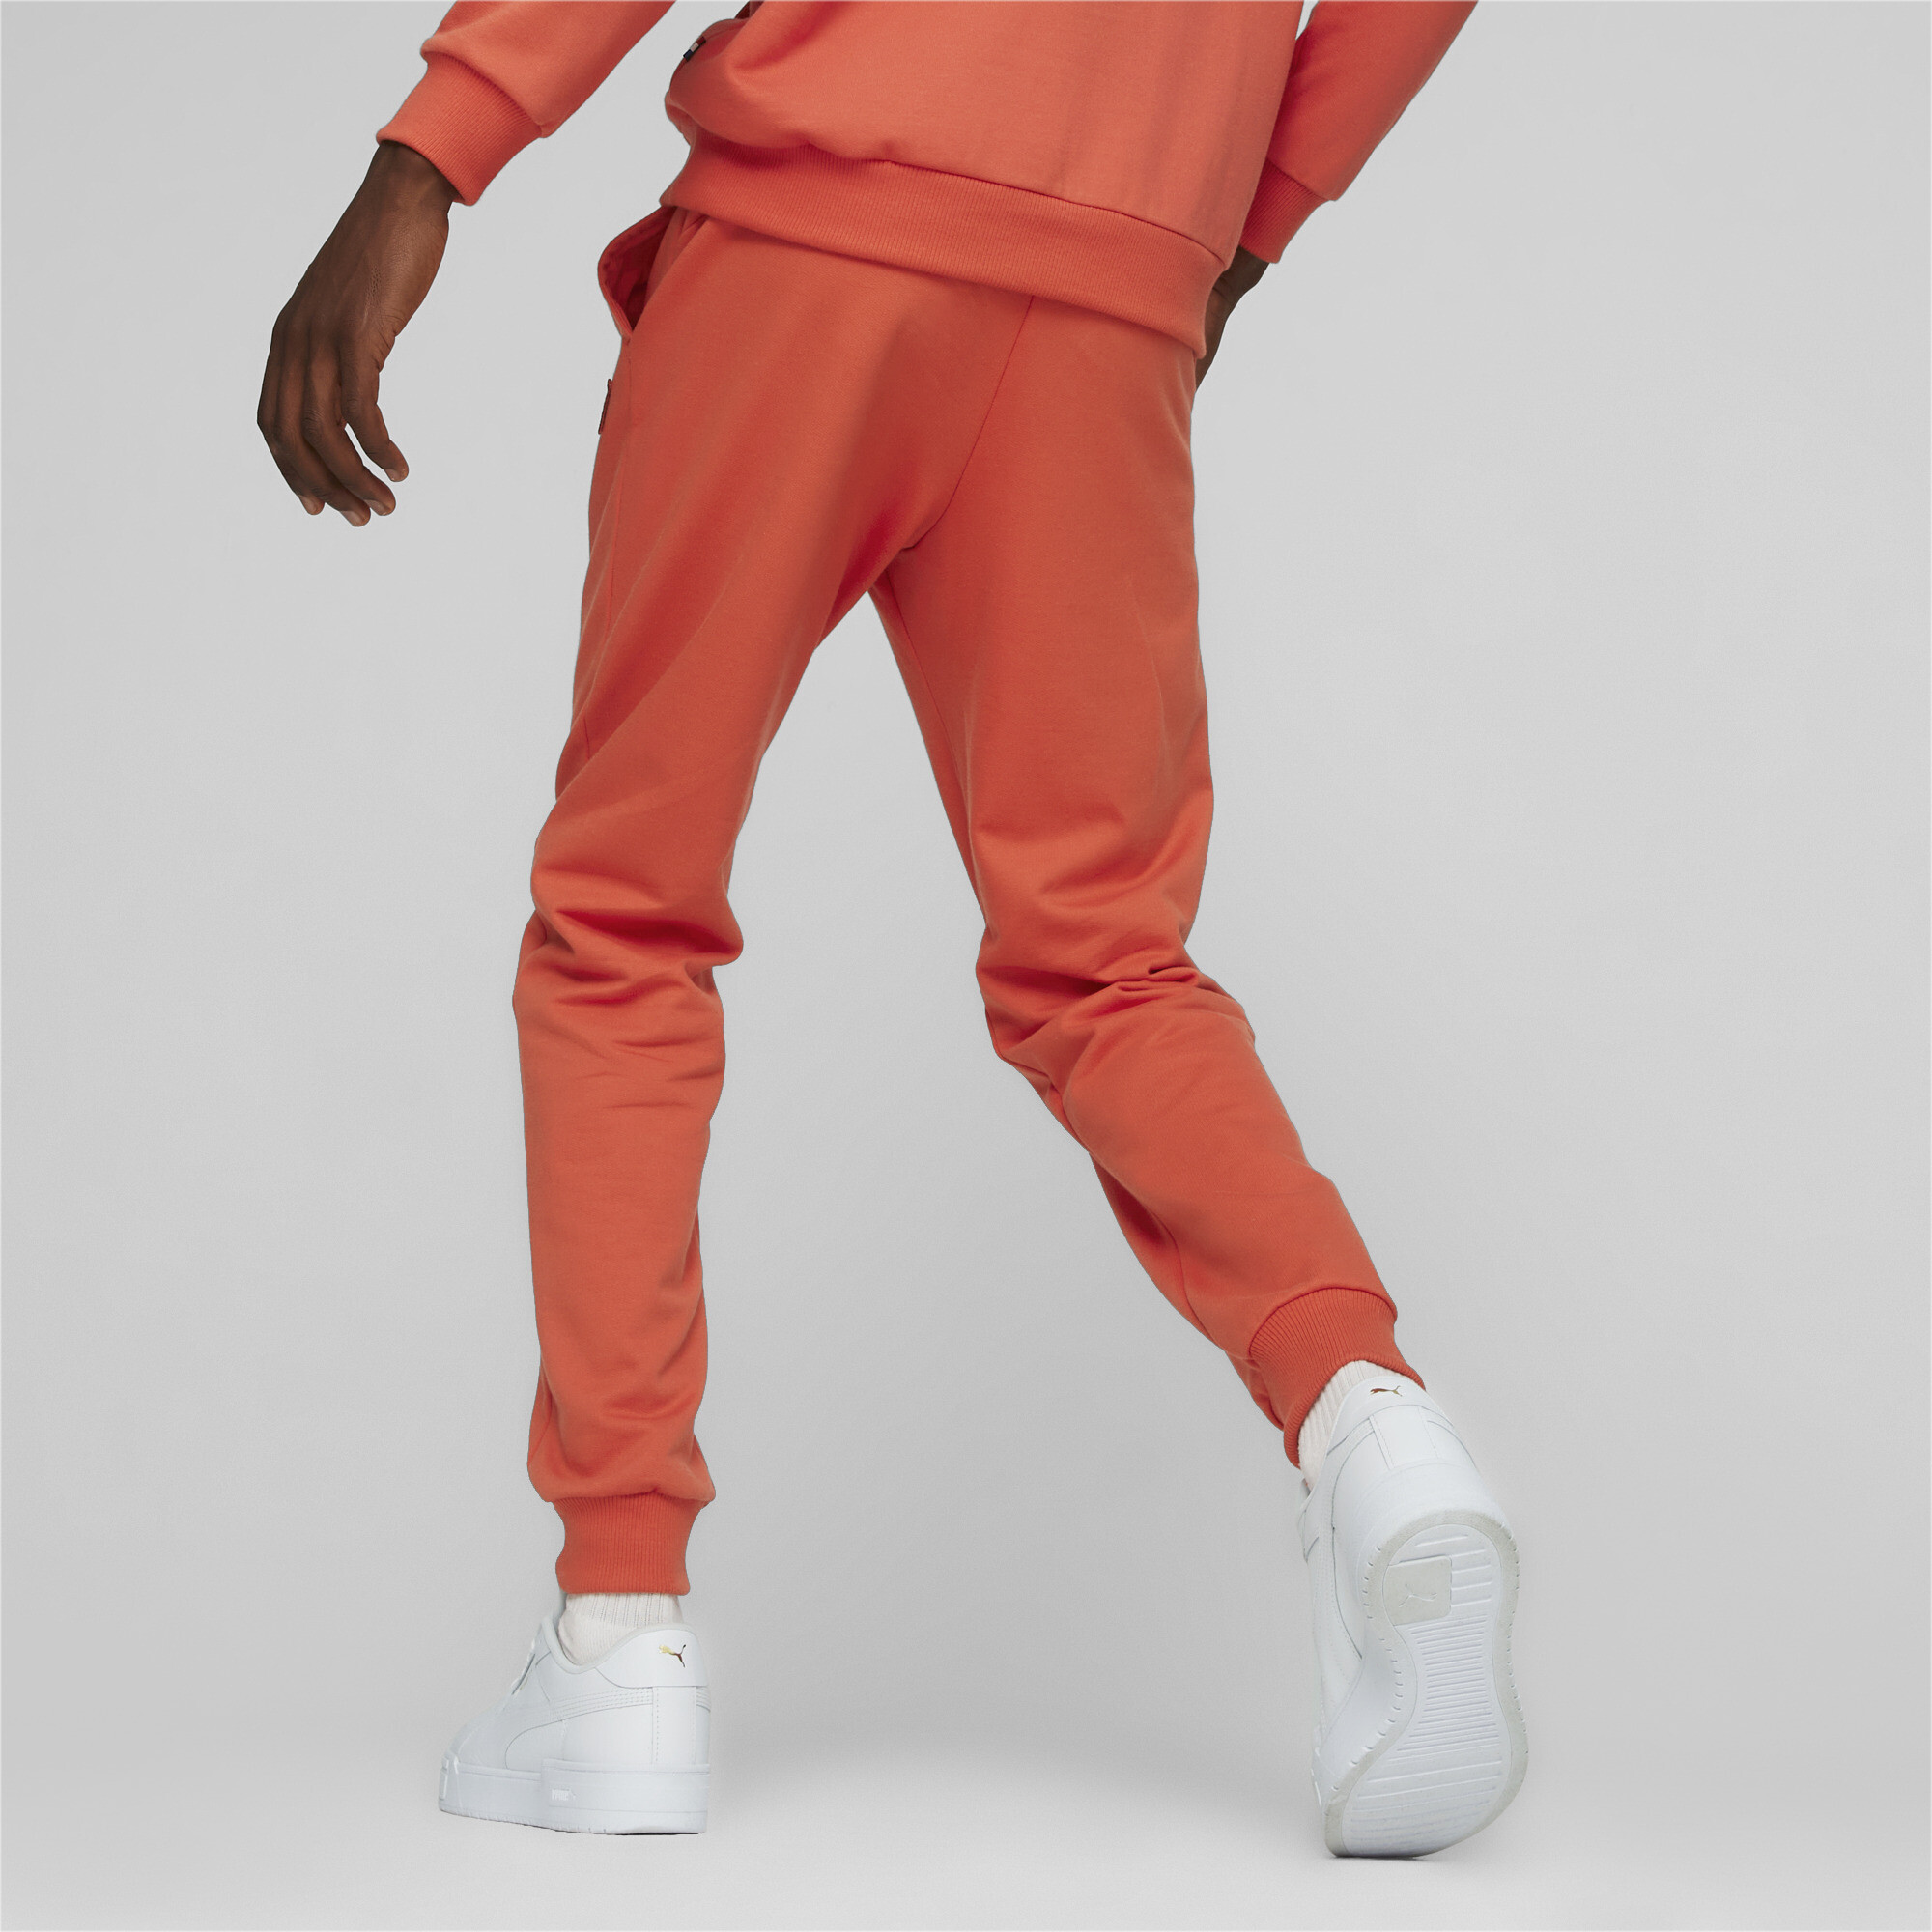 Puma Made In France Track Pants, Orange, Size XL, Clothing